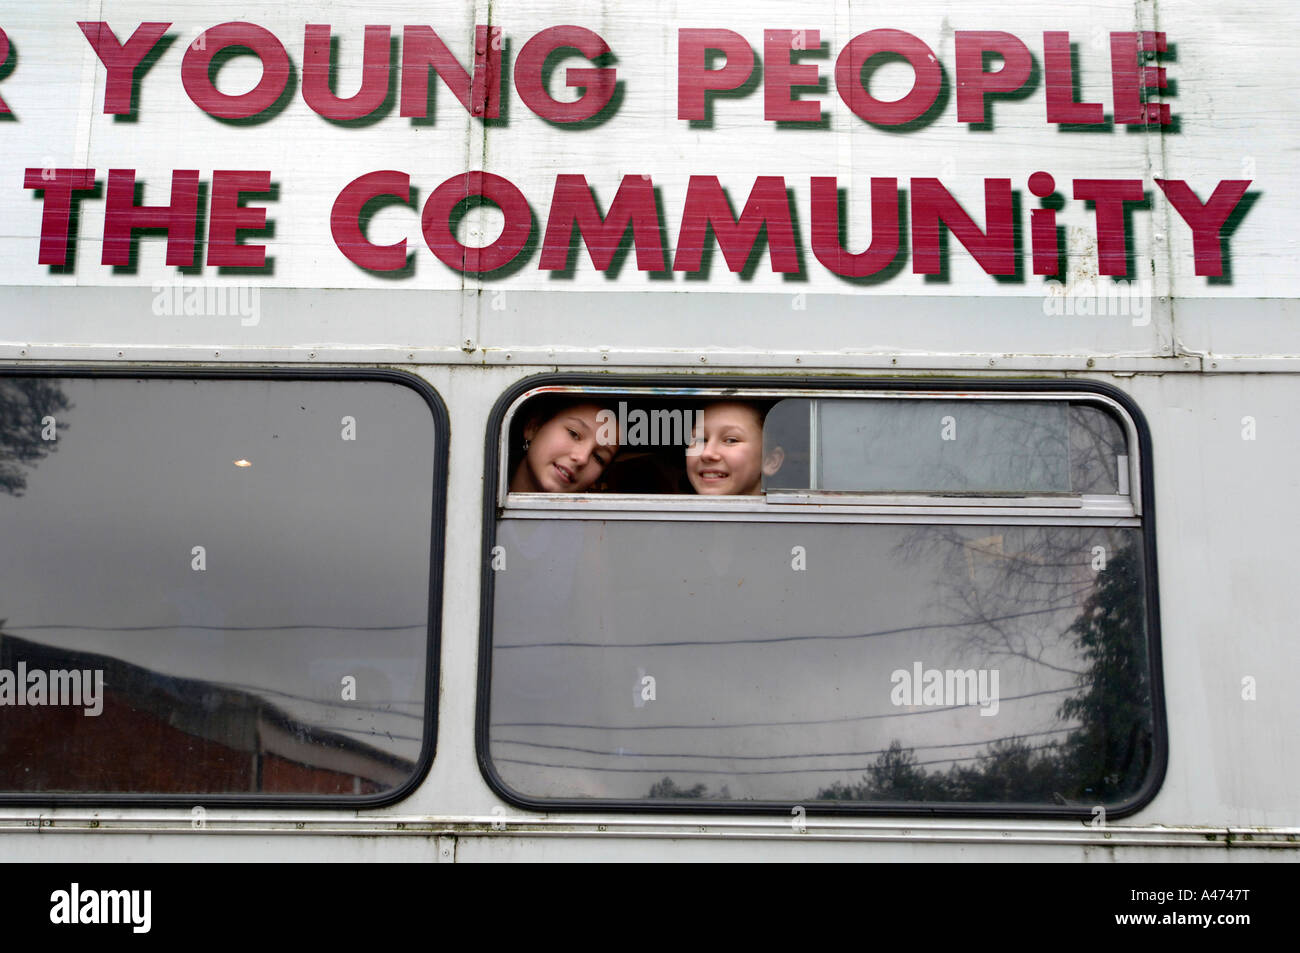 Two cheeky smiling girls look out of the window of a community bus Stock Photo